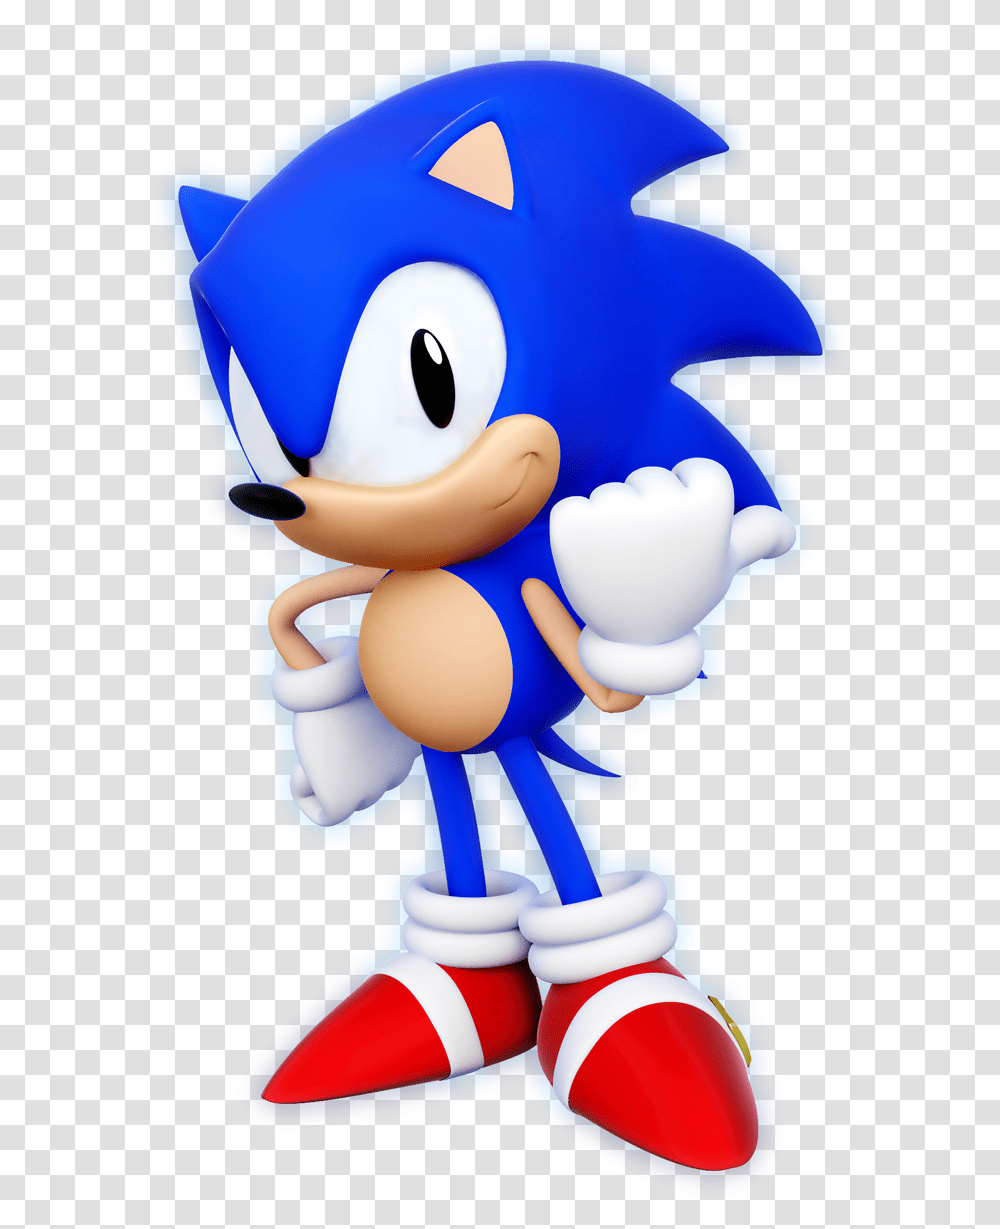 They Call Me Sonic Thesonic2 Twitter Sonic Hd, Toy, Rattle Transparent Png